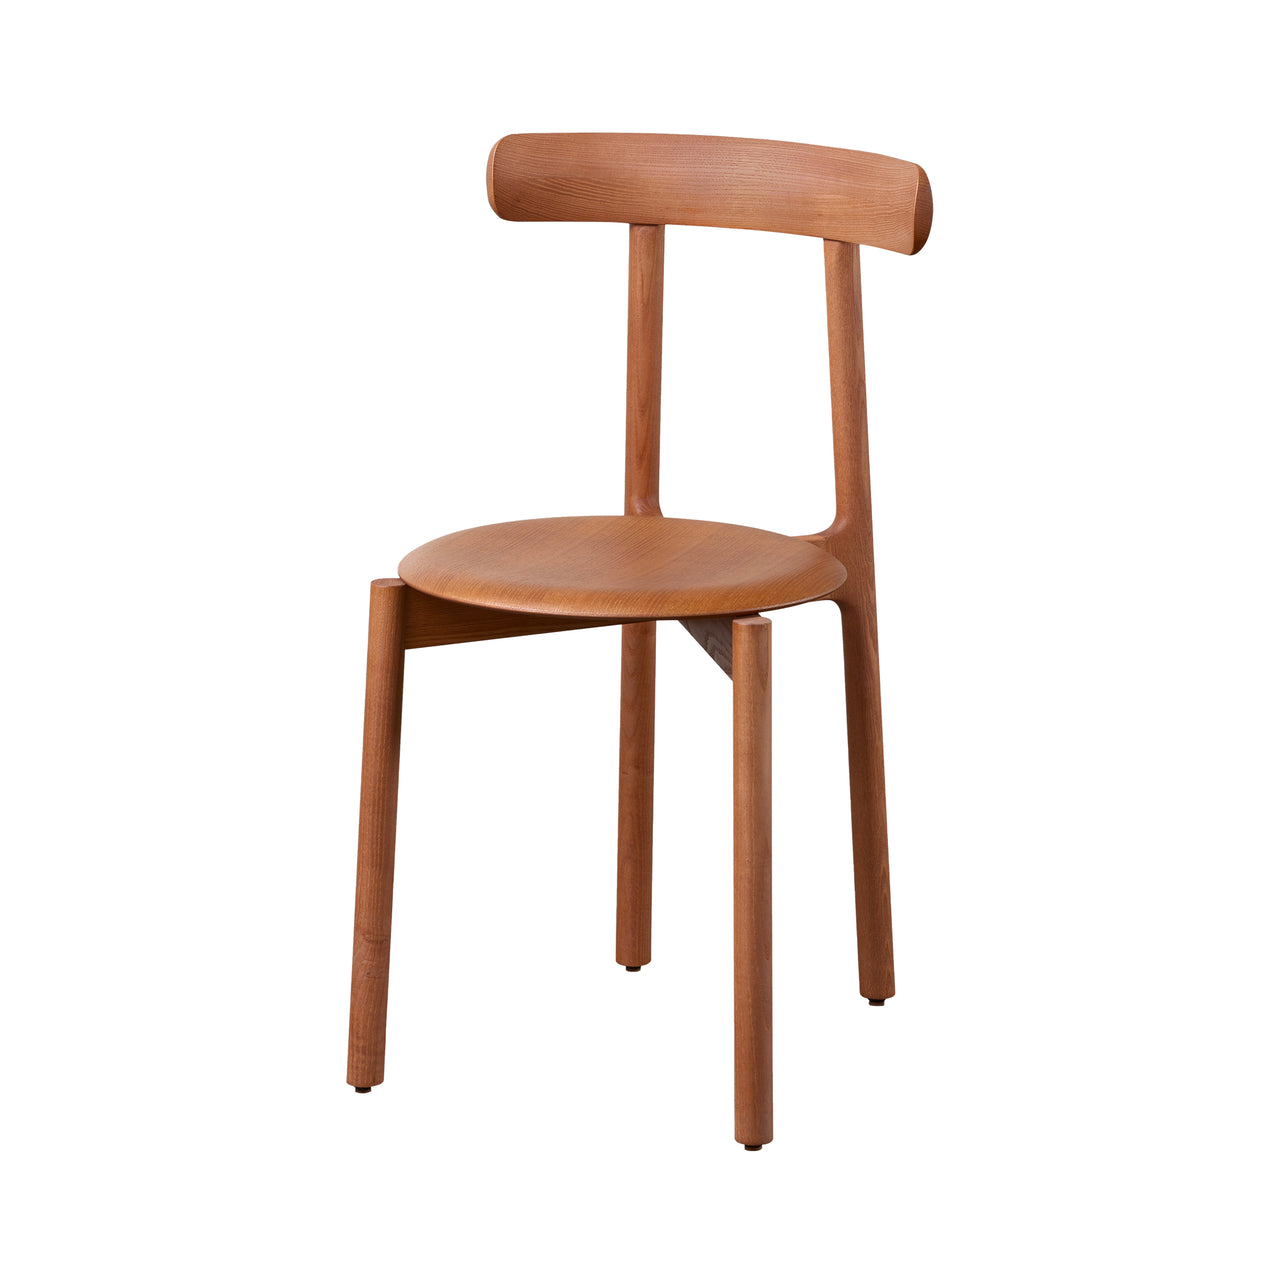 Bice Chair: Stained Oak